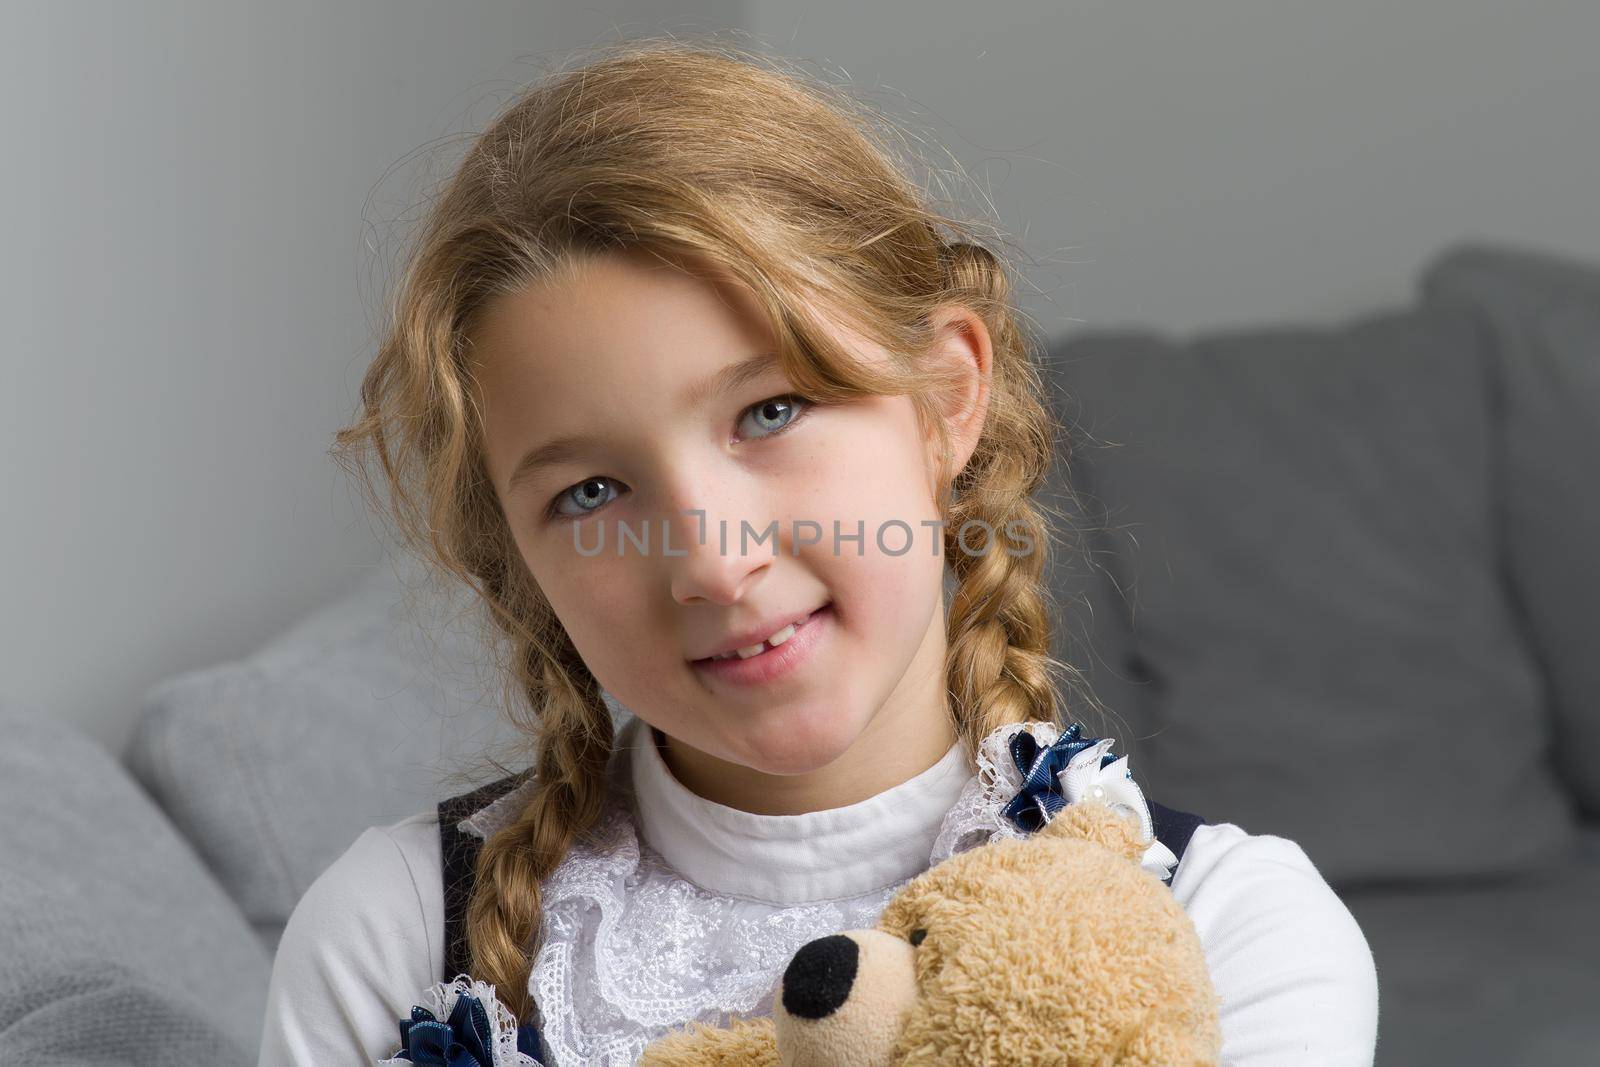 Cute schoolgirl sitting on sofa with teddy bear. Adorable primary school girl with braids dressed in uniform hugging her favorite toy. Back to school, education concept